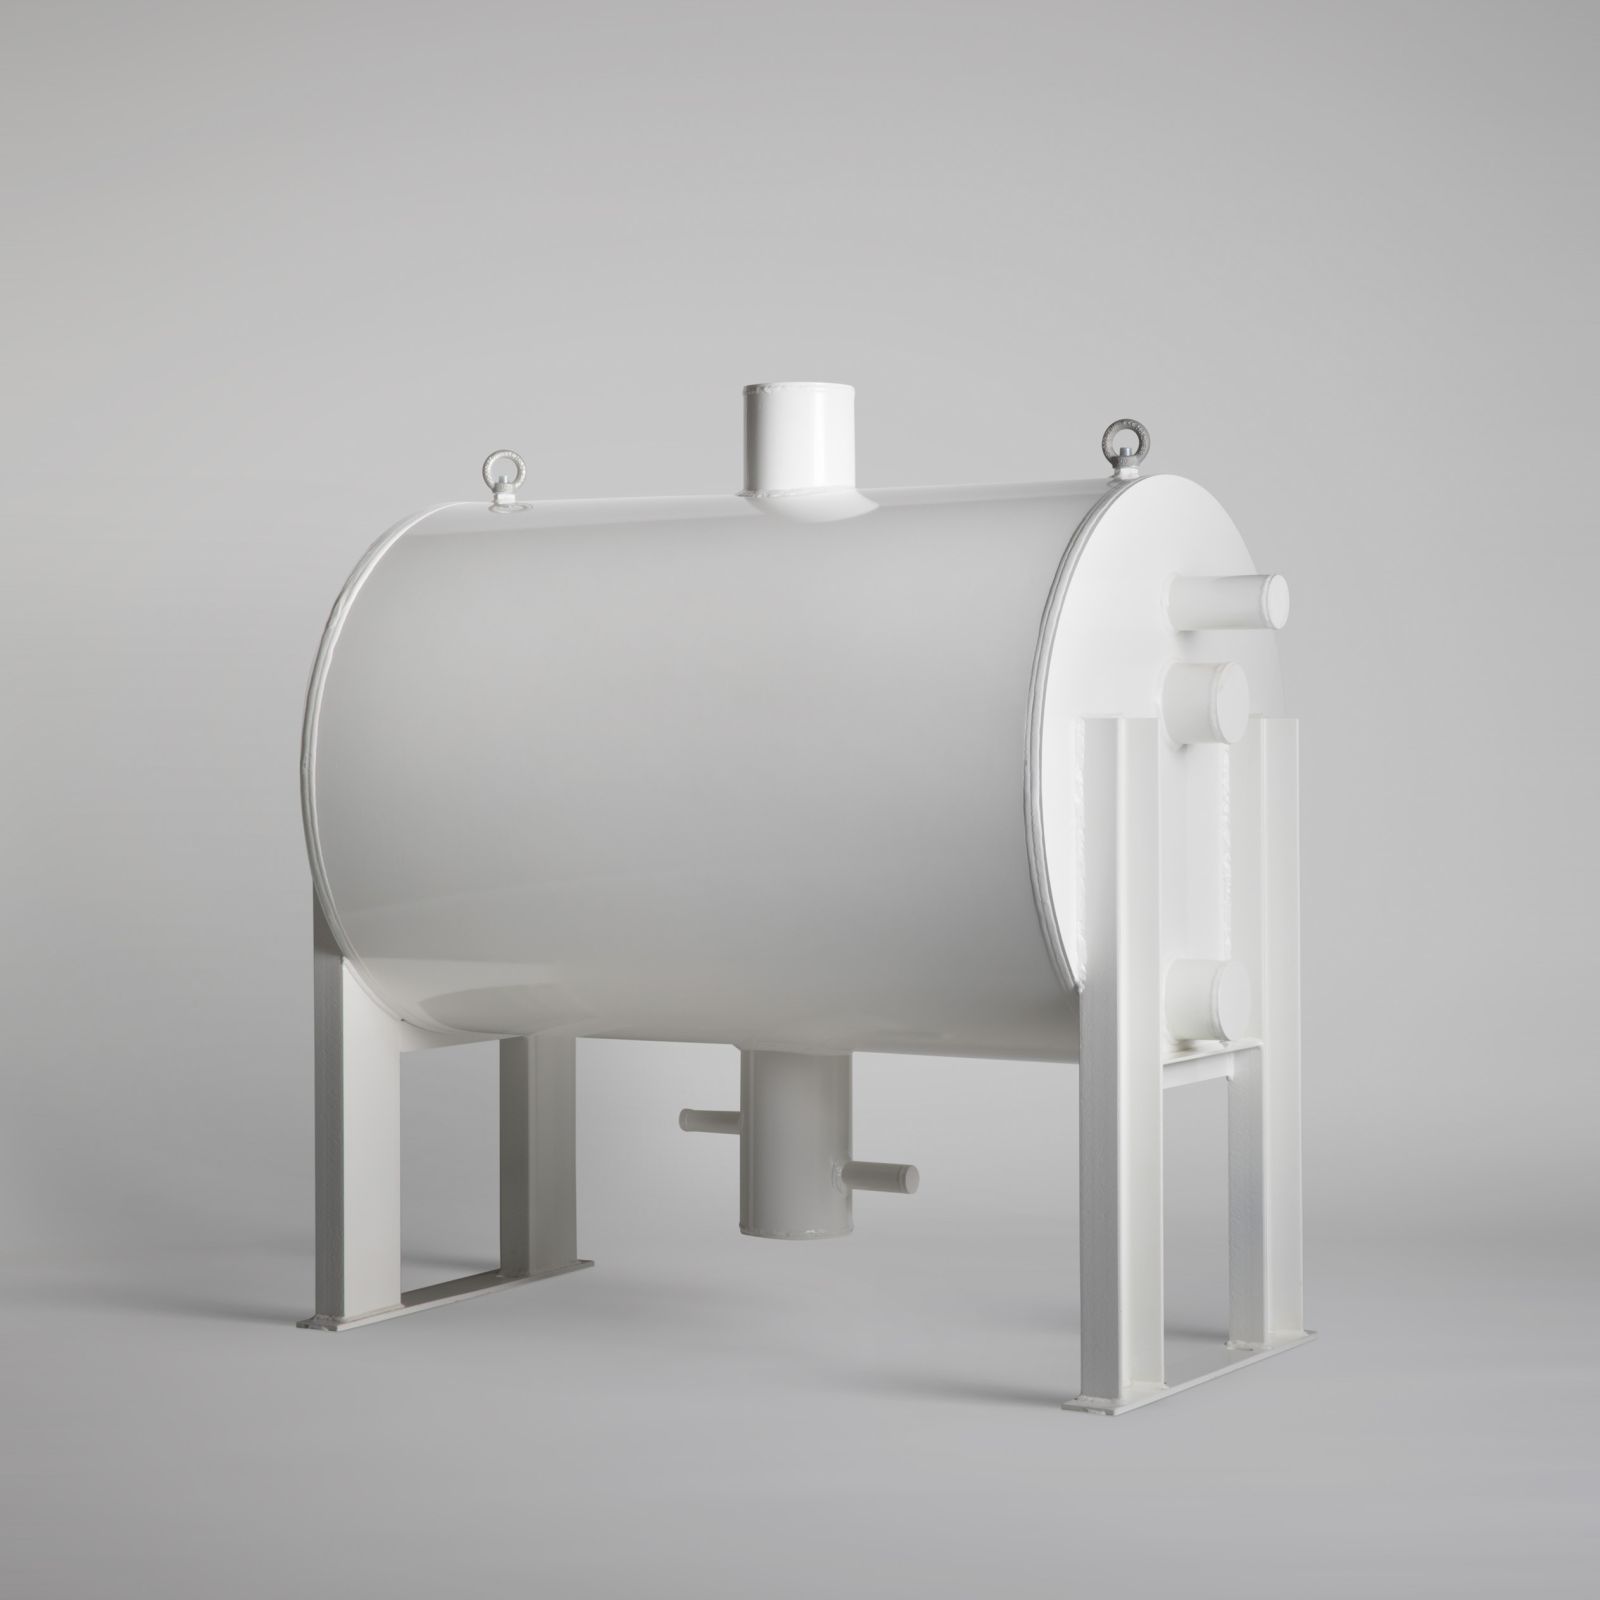 Vahterus PSHE Combined Evaporator - A single-shell solution with an integrated separator